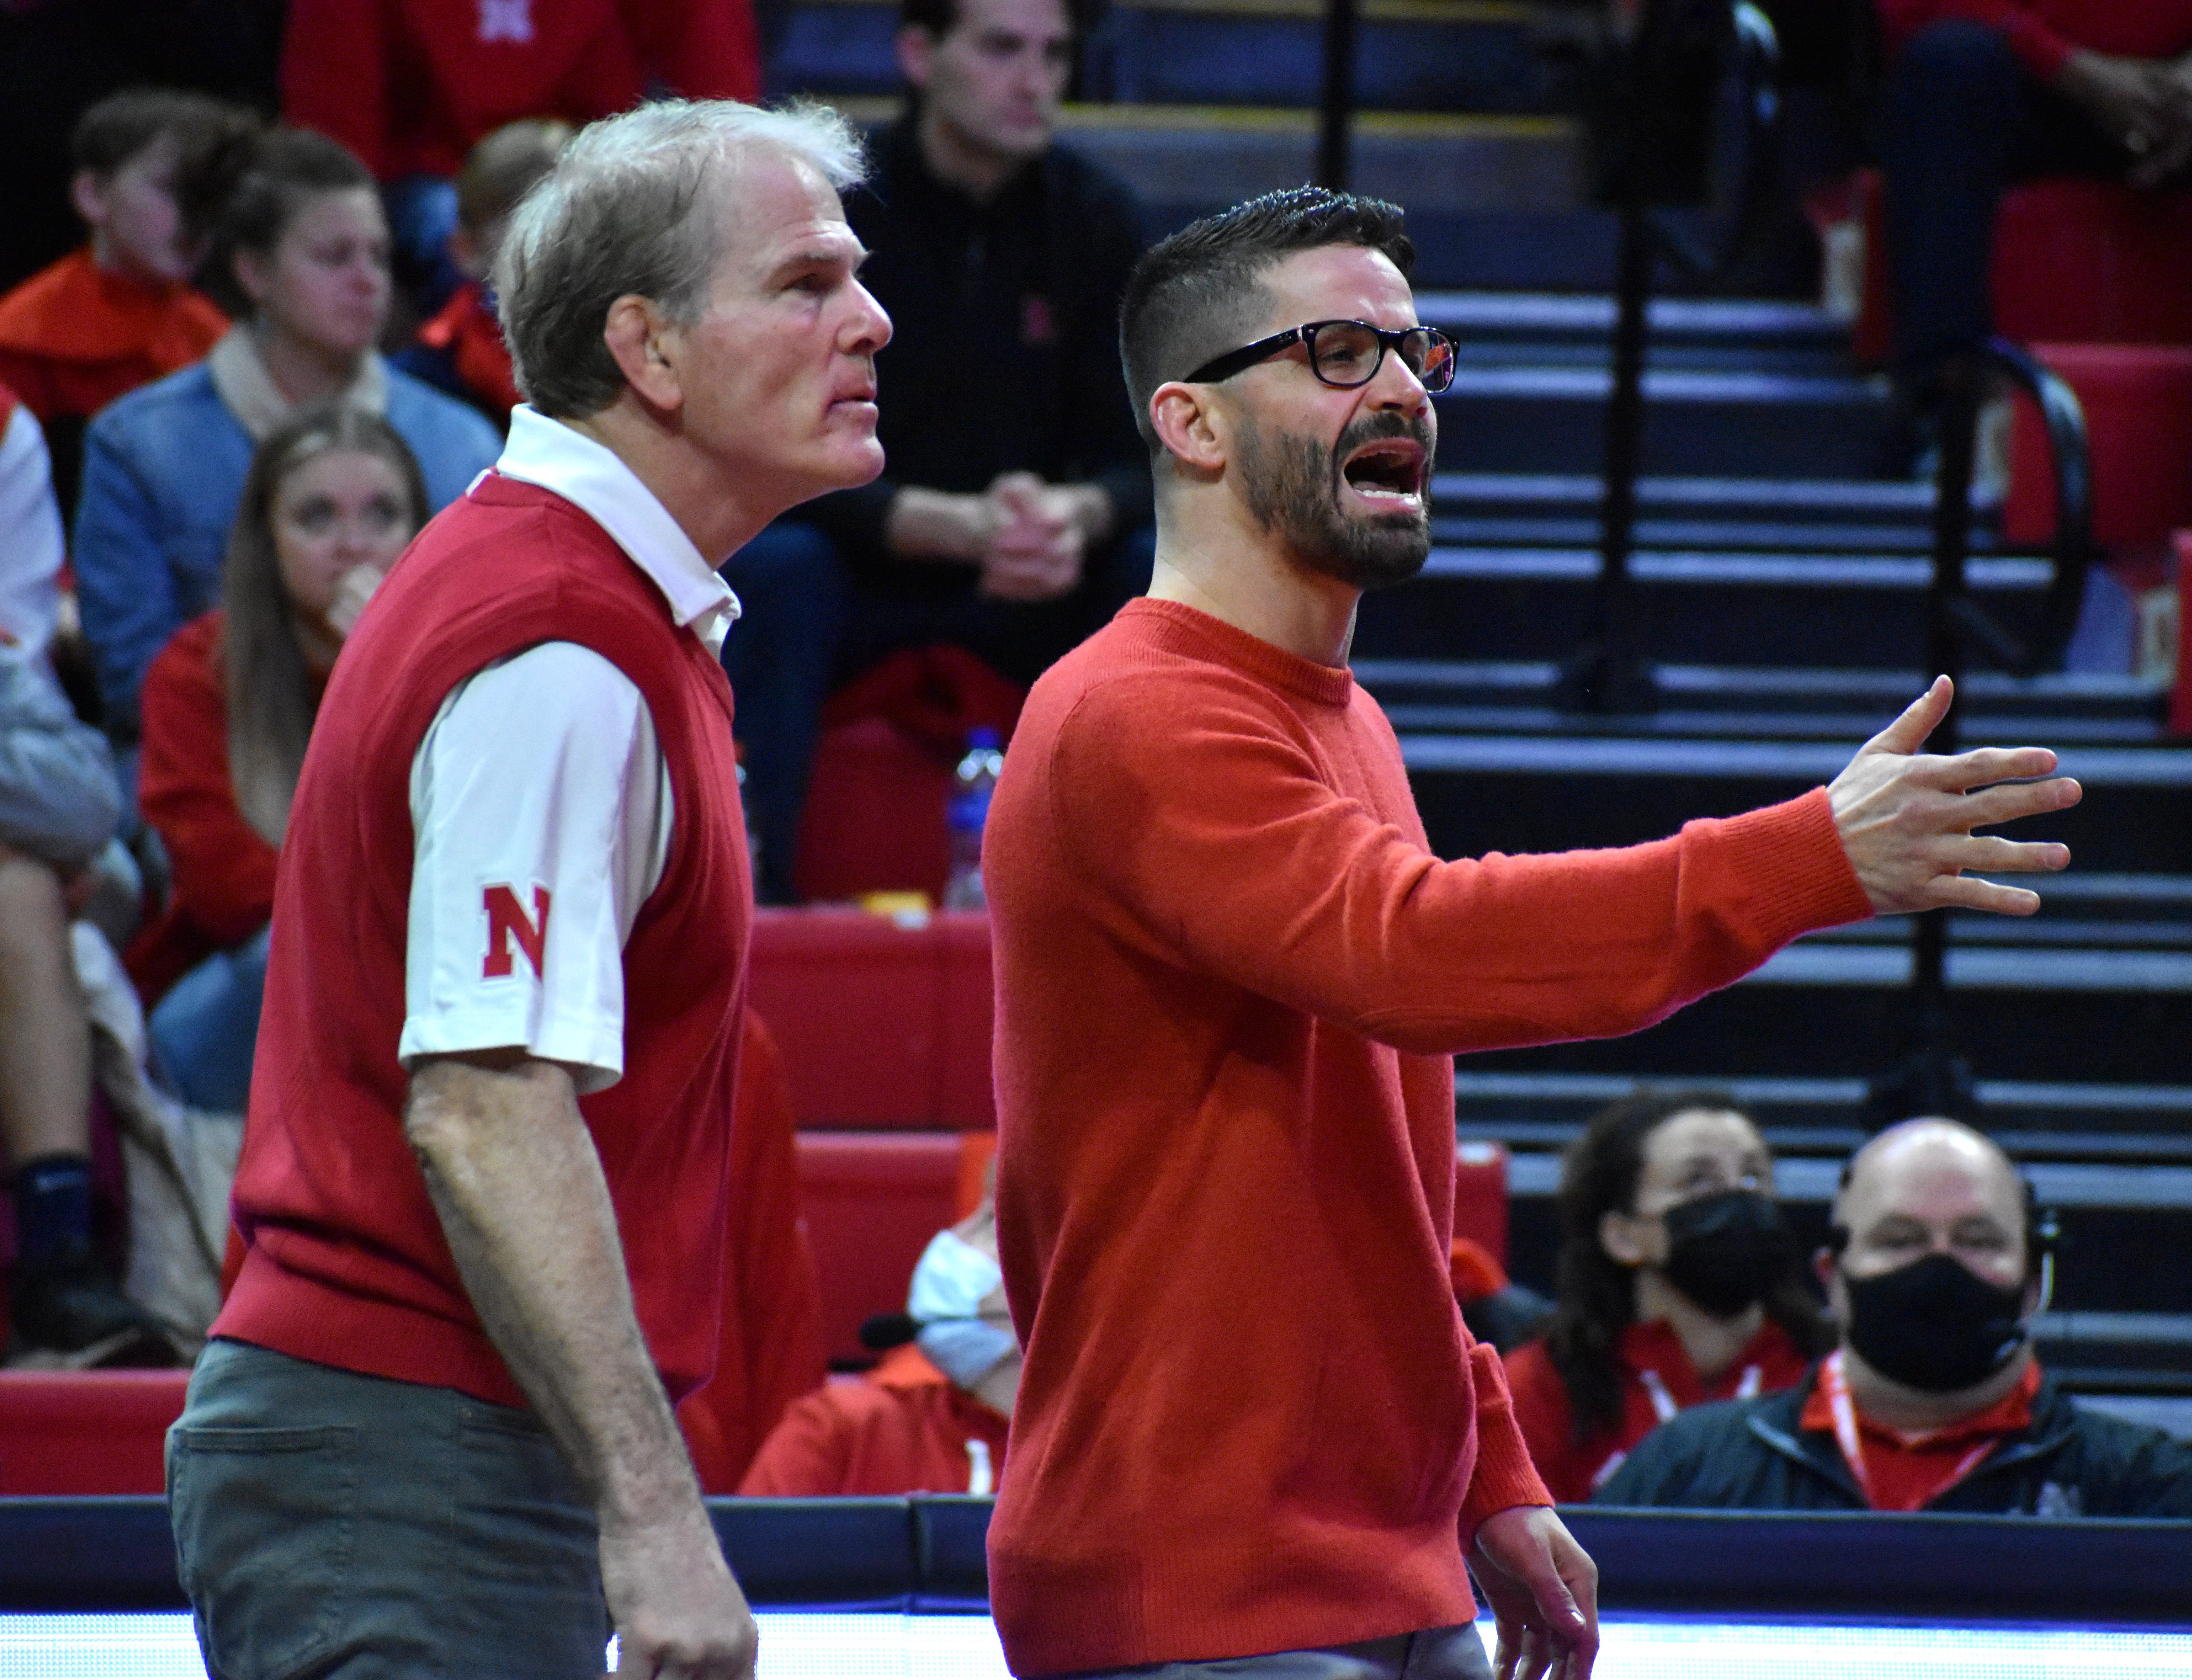 Nebraska Head Coach Mark Manning (left) and Associate Head Coach Bryan Snyder look on during a dual against Illinois on Feb. 13, 2022 at the Bob Devaney Sports Center.